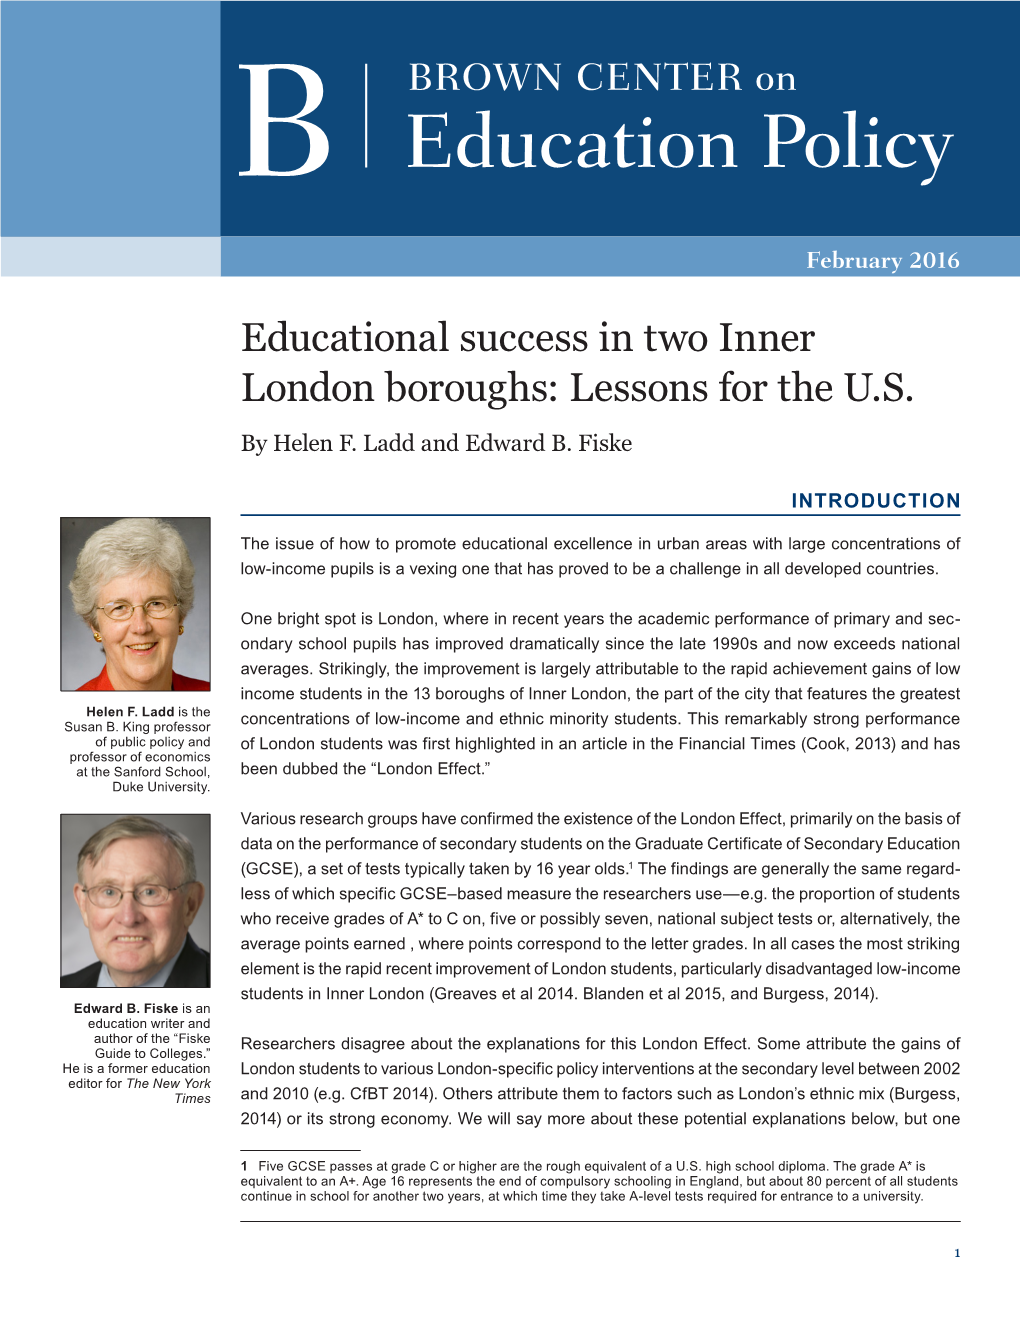 Educational Success in Two Inner London Boroughs: Lessons for the U.S